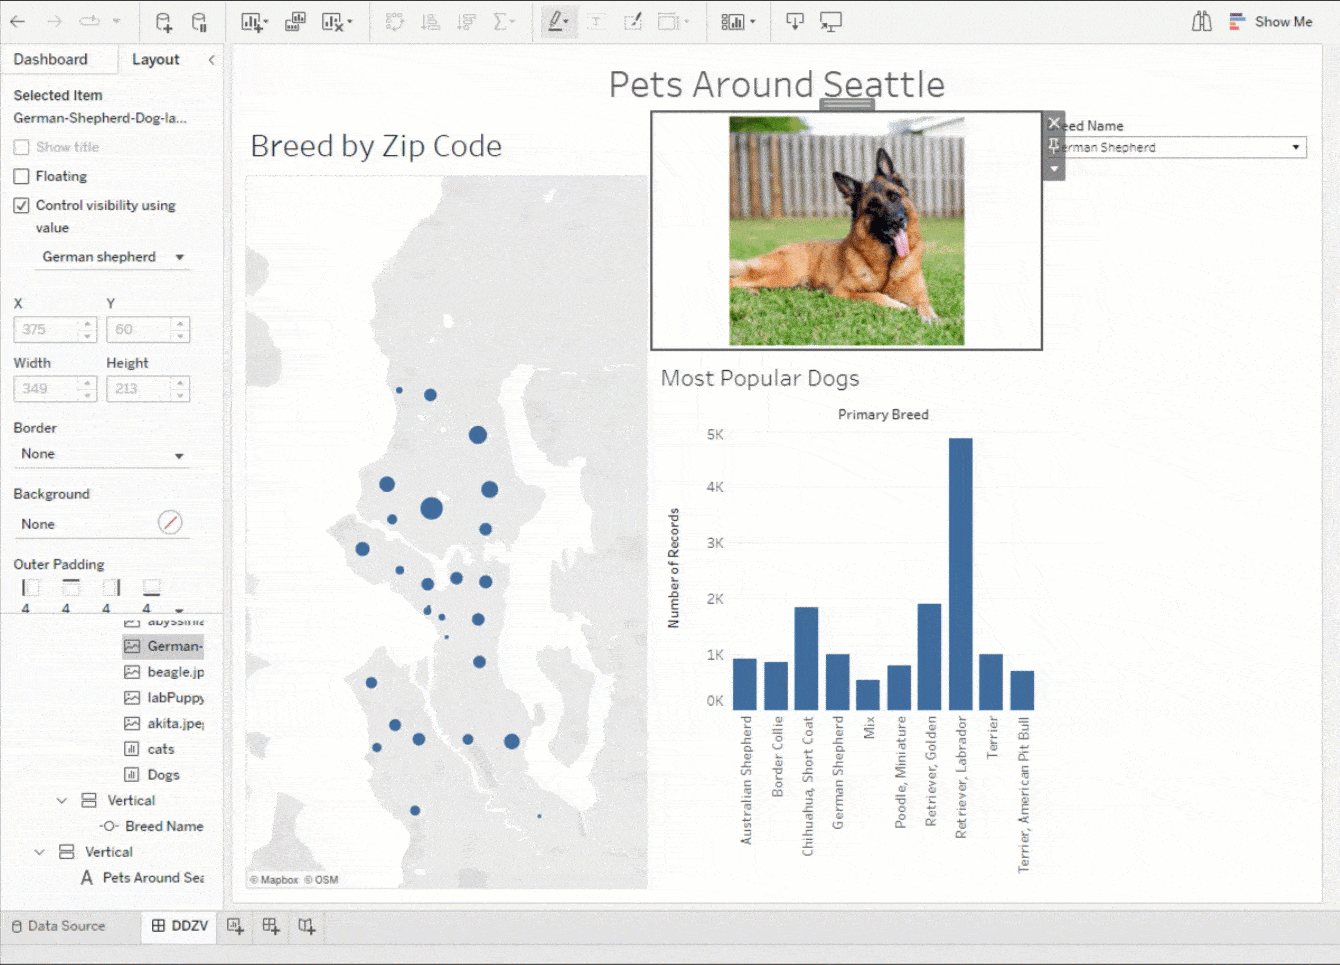 Gif of dynamic zone visibility in the Tableau interface